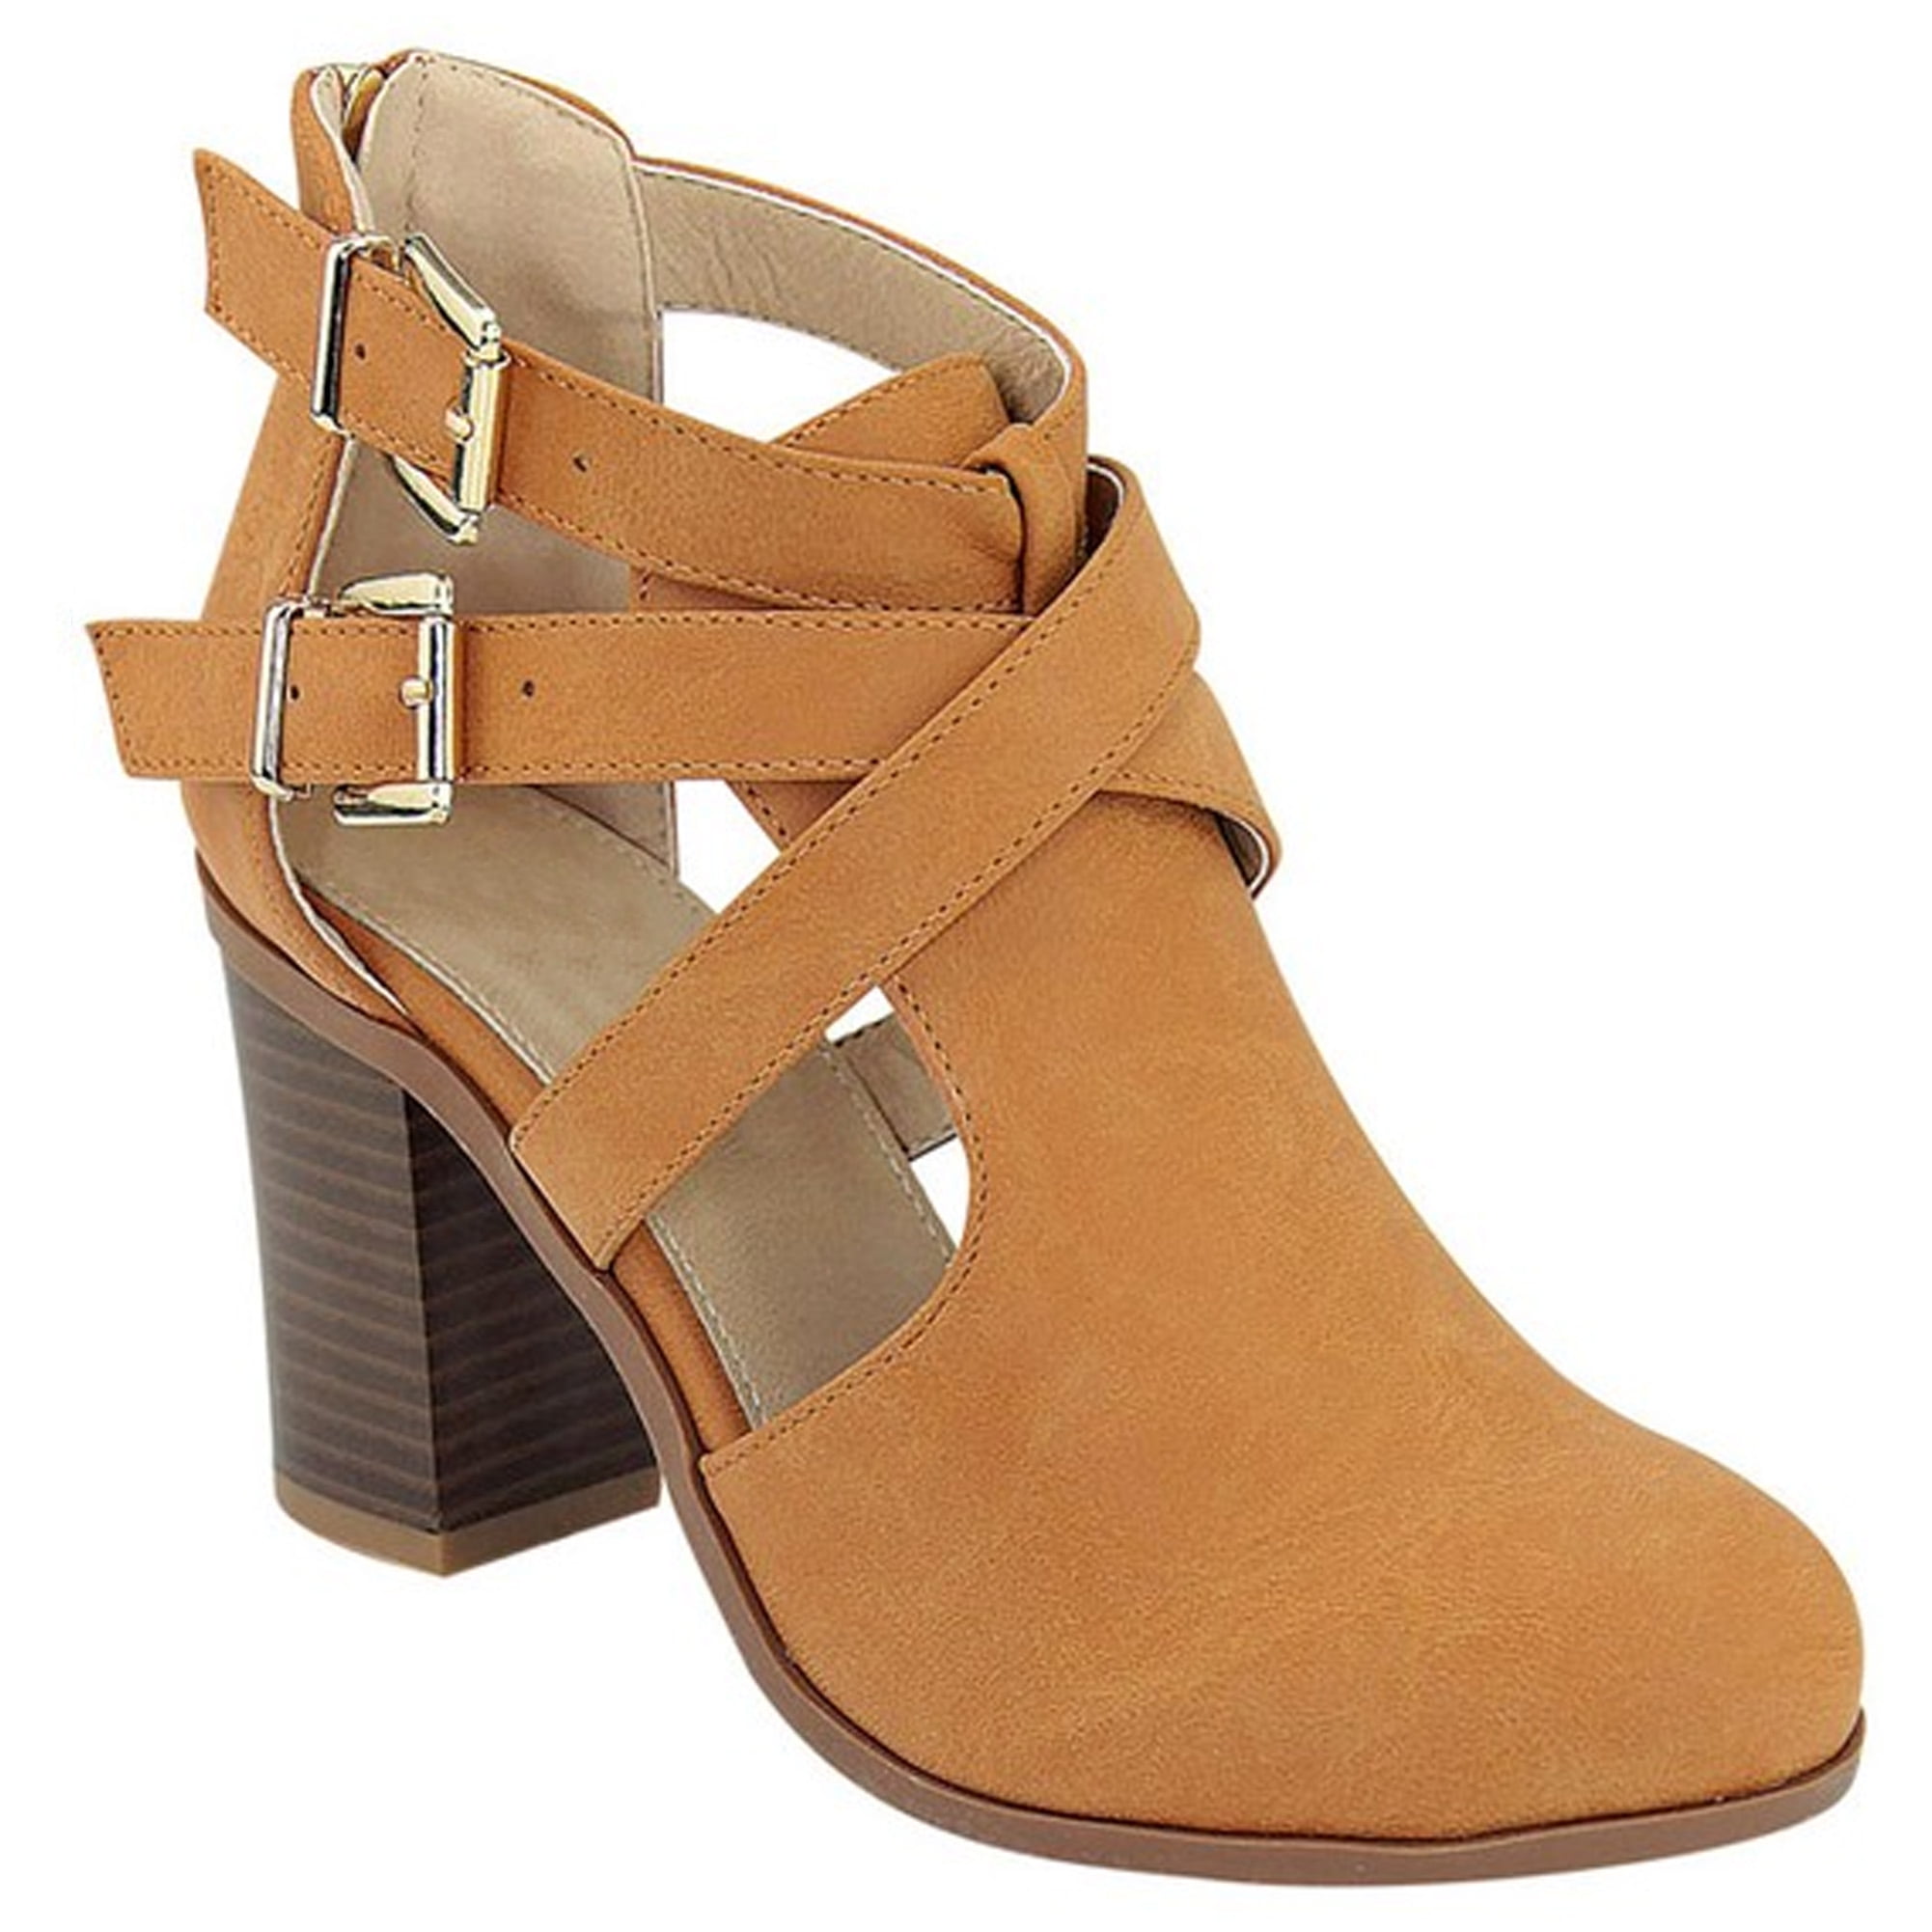 SNJ - Women's Ankle Boot Western Riding Strappy Chunky Heel Bootie ...